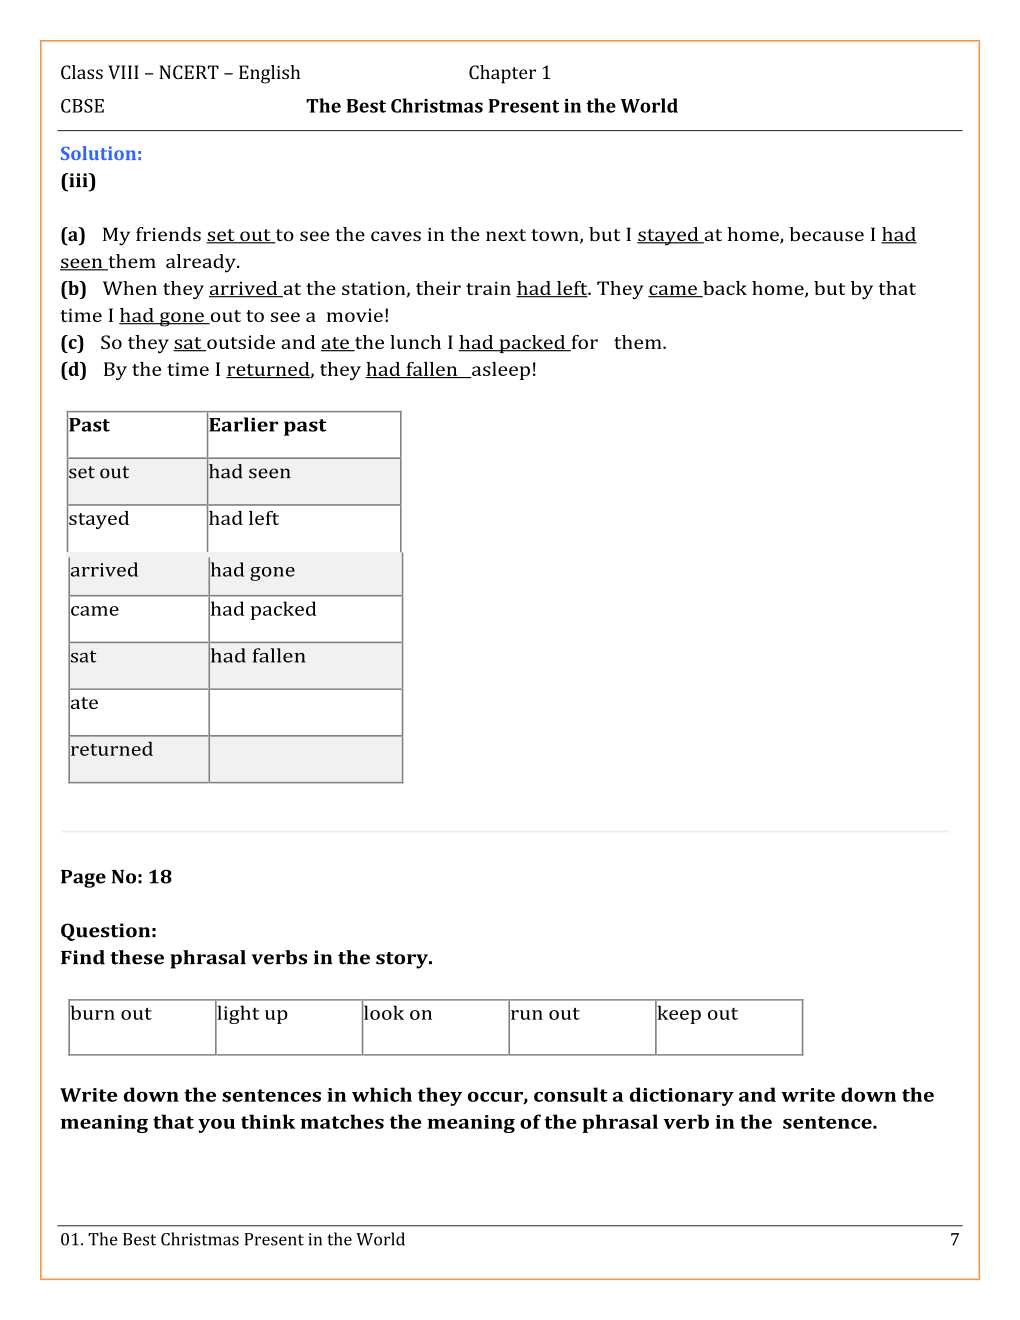 NCERT Solutions For Class 8 English Honey Dew Chapter 1 